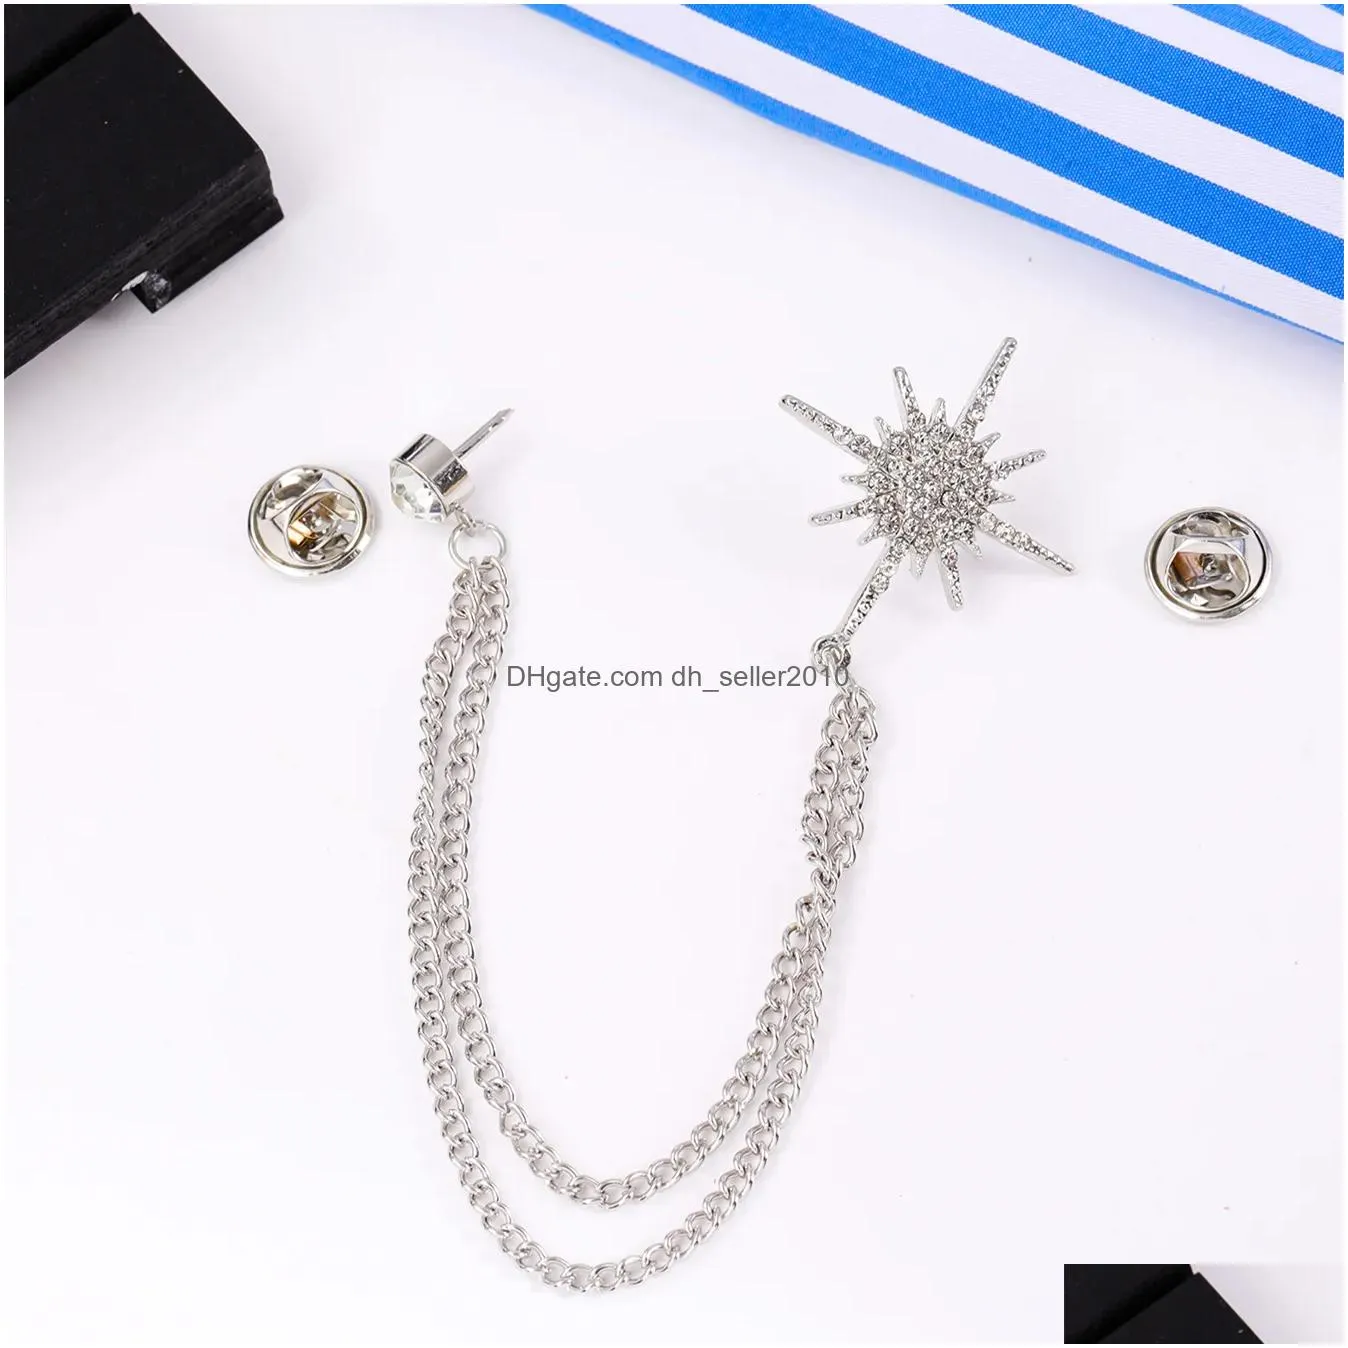 Pins, Brooches Shining Star Personality Trend Sunflower Diamond Brooch Female Minimalist Chain Pendant Set Drop Delivery Jewelry Dhkd9